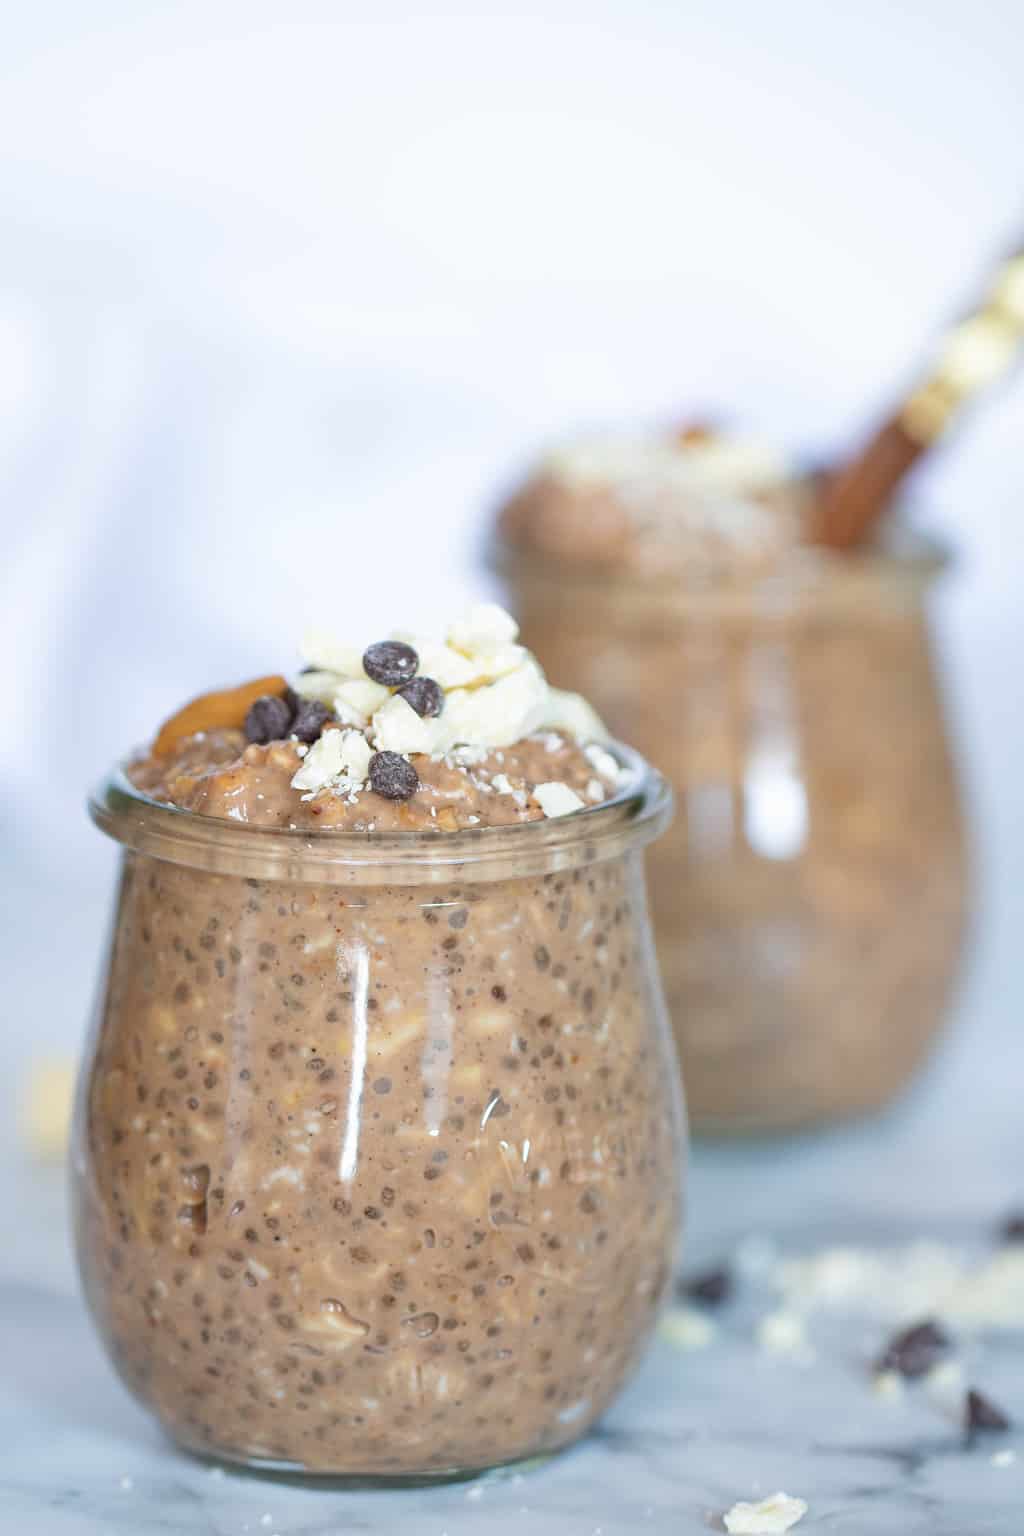 Superfood Overnight Oats: Maca, Cacao, + Chia Seeds